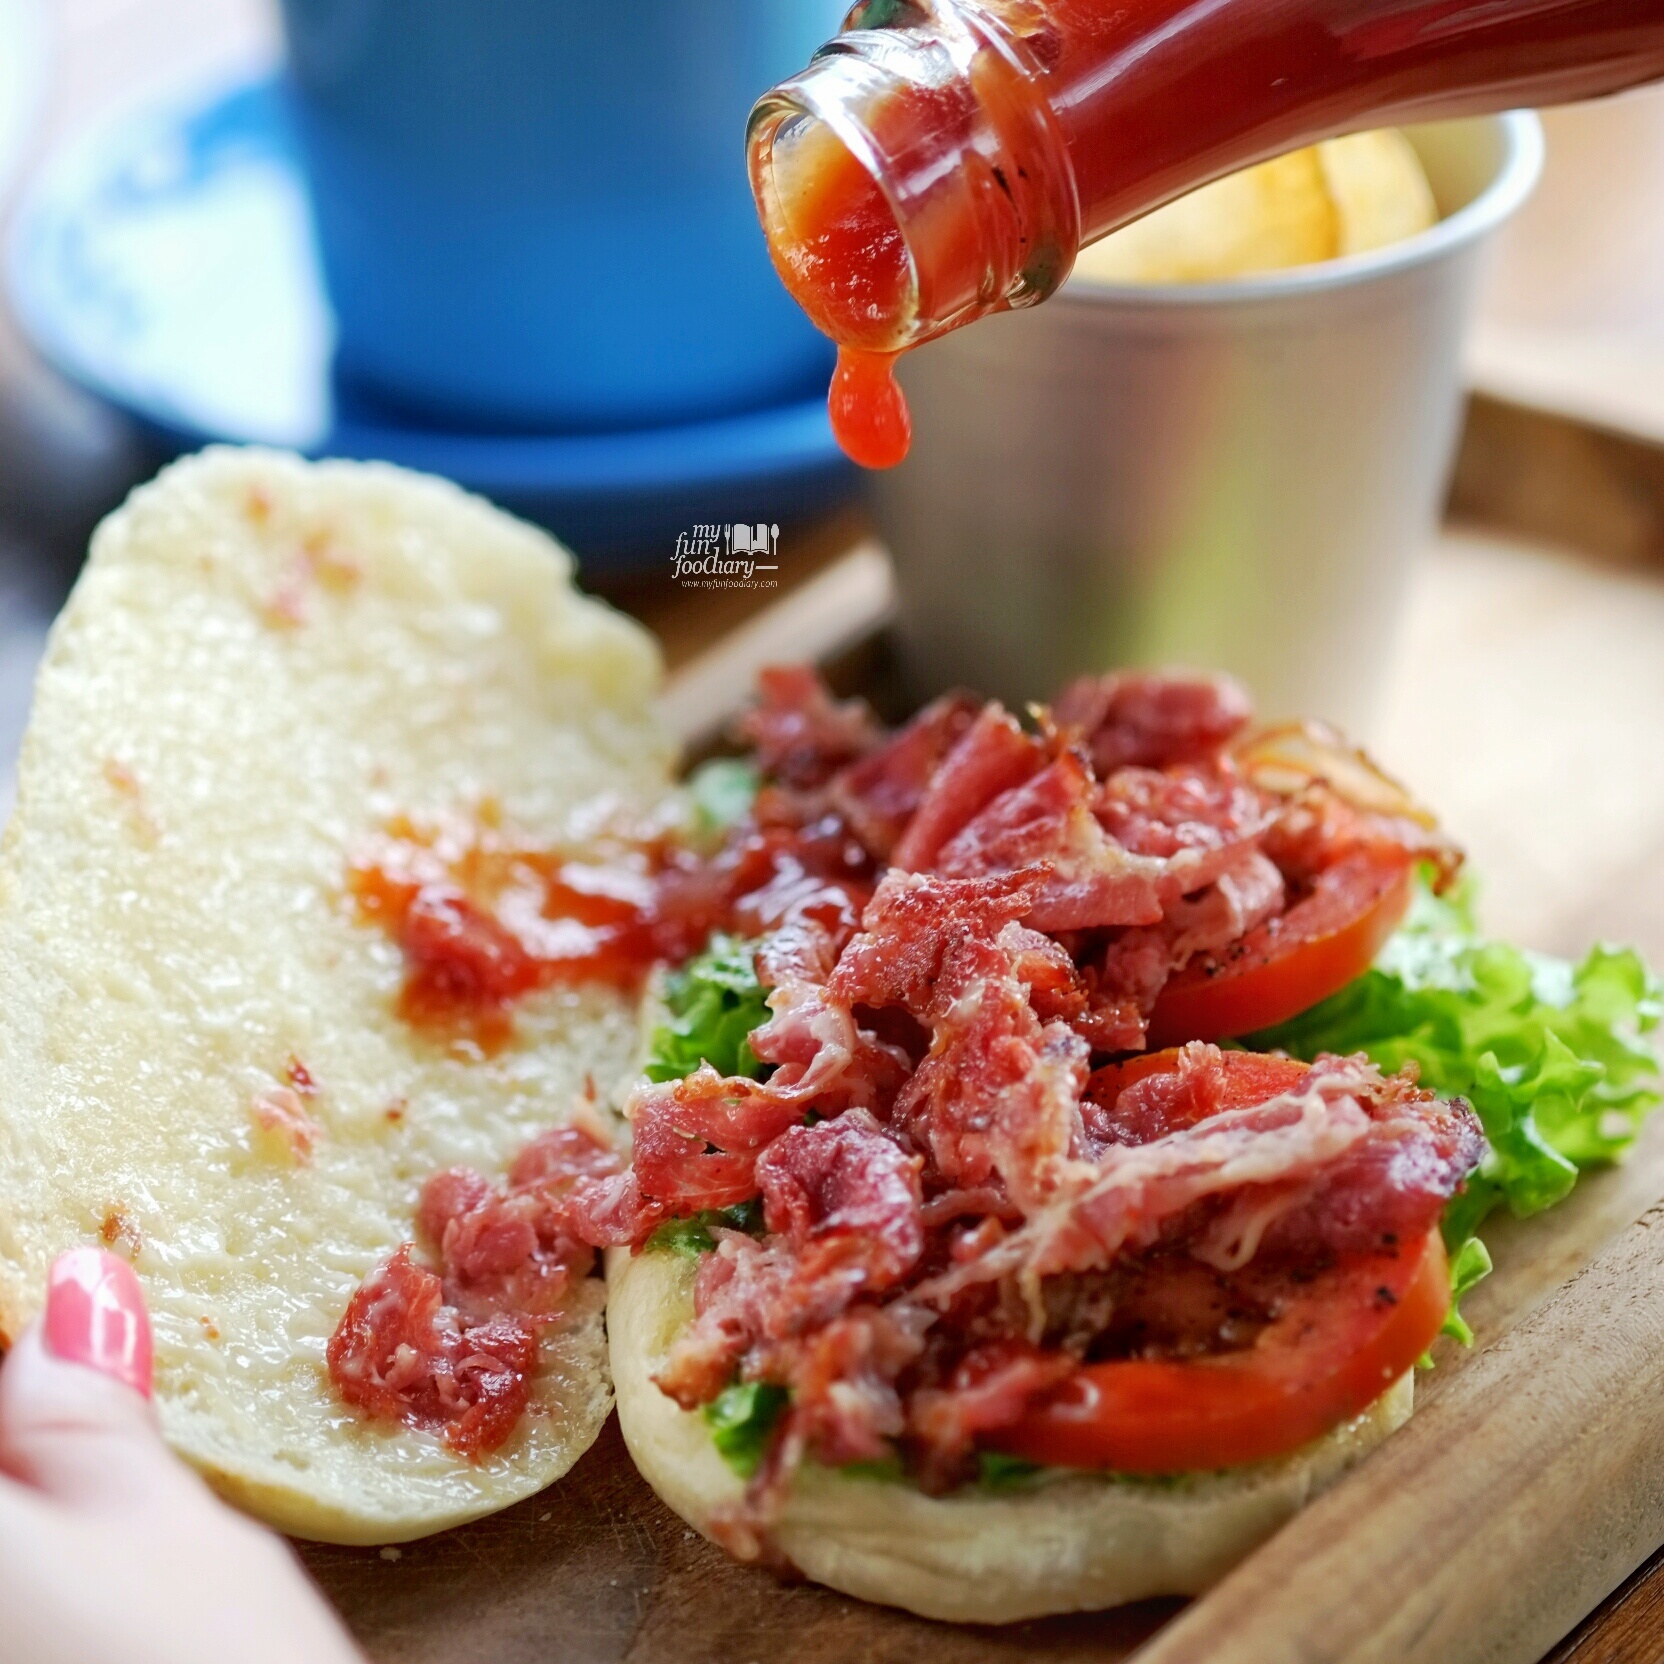 Beef BLT Sandwich at Brown Bag Kemang by Myfunfoodiary 03